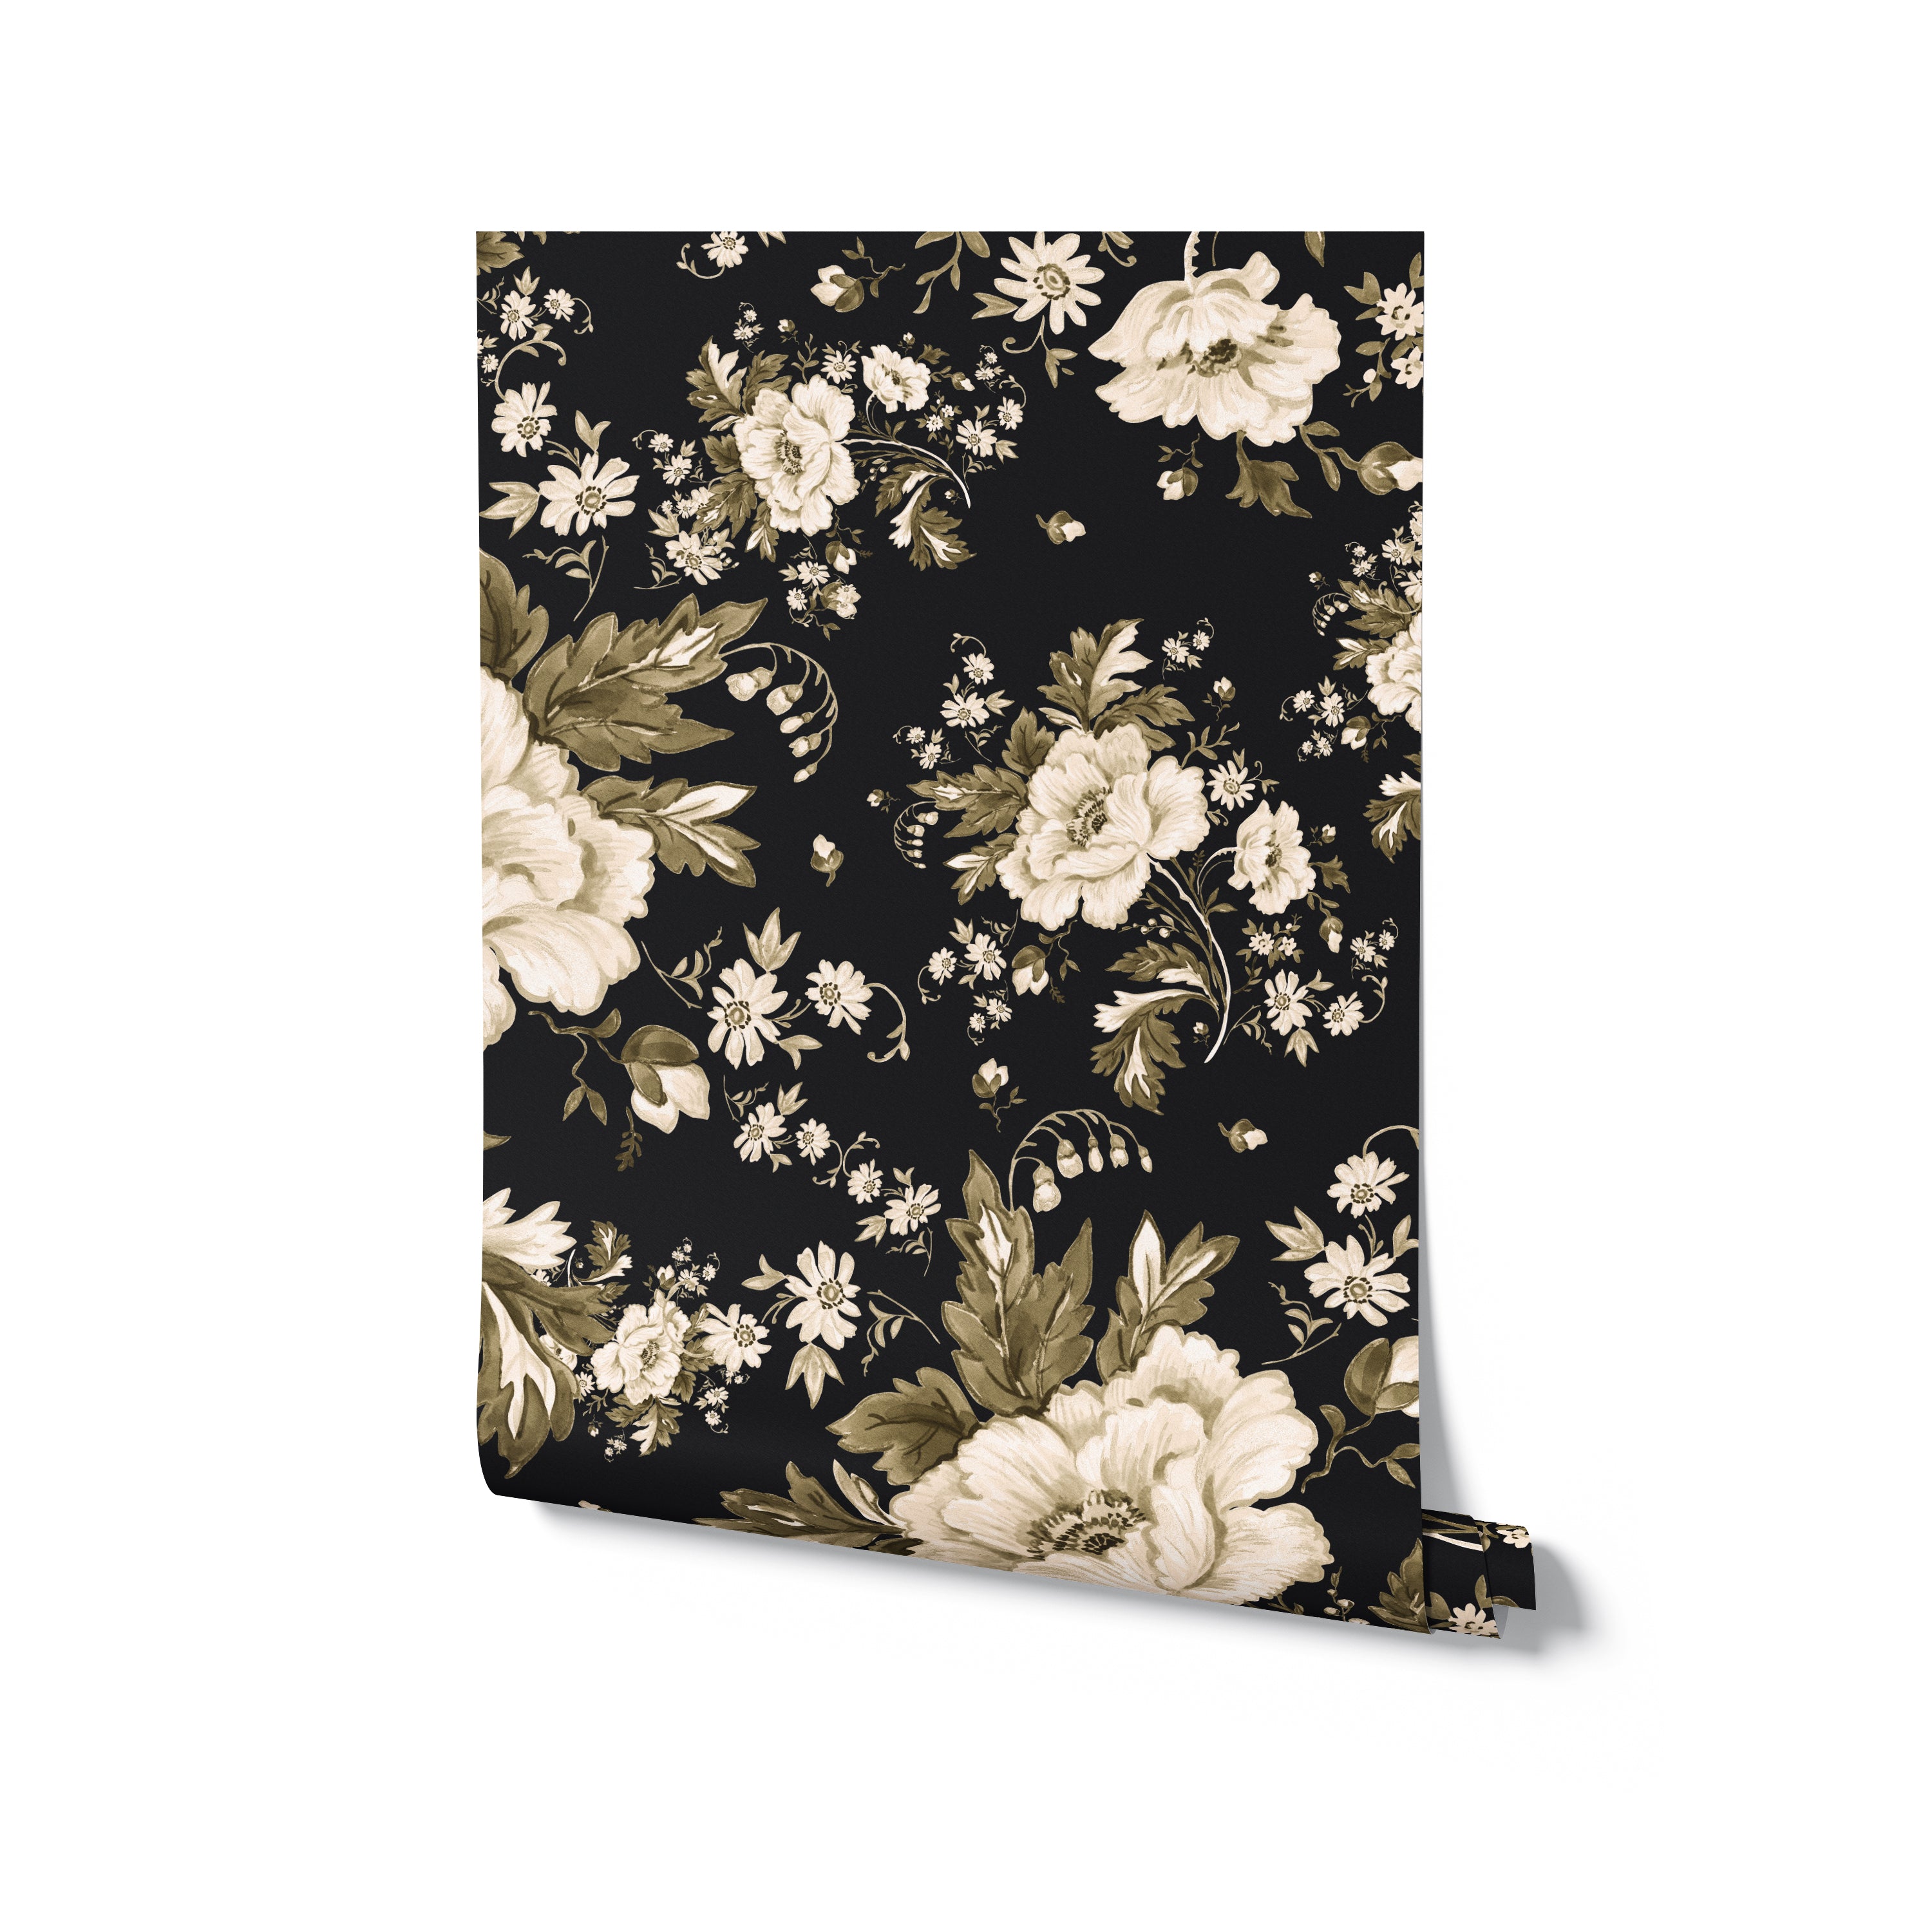 An image of a roll of Midnight Garden Wallpaper, emphasizing the lush floral print on a black background. This wallpaper roll is ideal for transforming any room into a statement space with its bold pattern and dark tones.